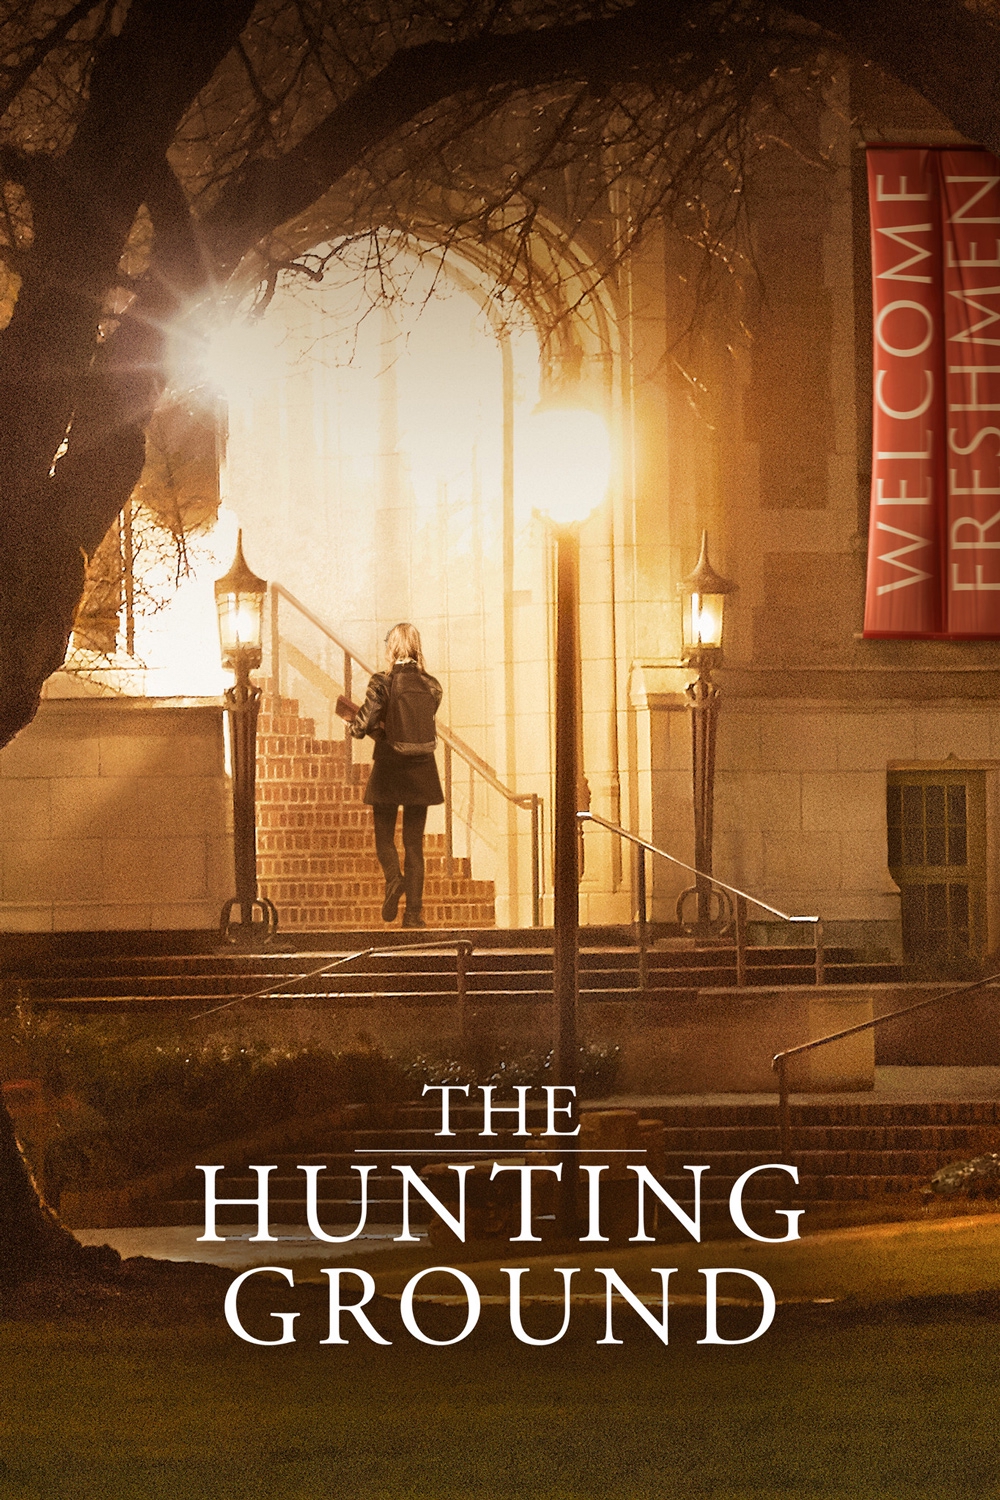 the hunting ground download torrent